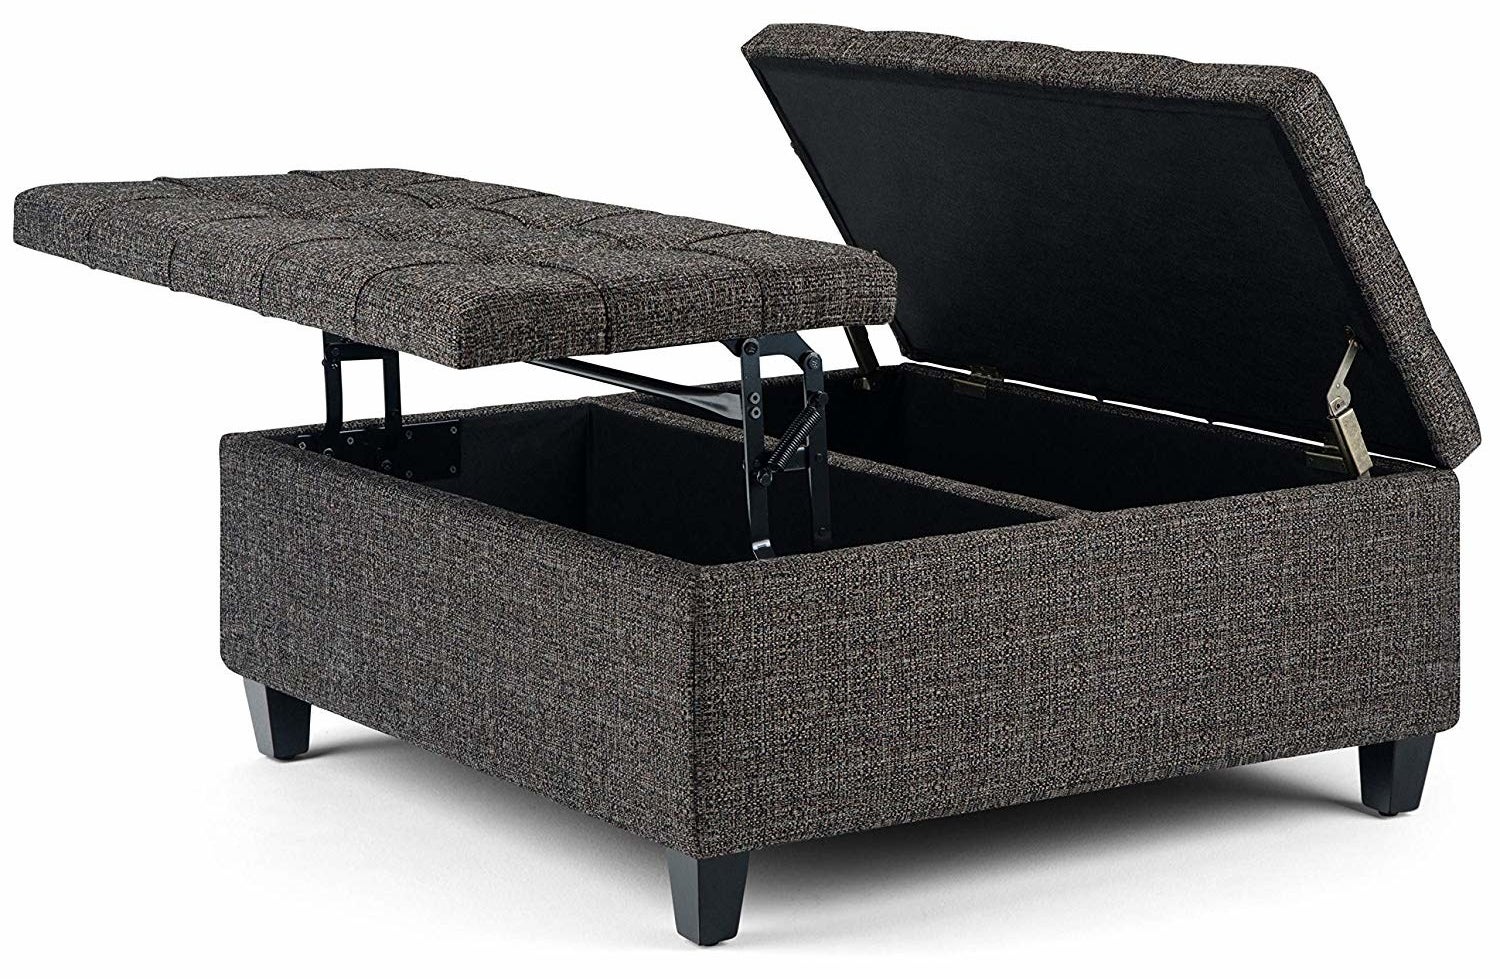 gray rectangular ottoman with lids that raise up to reveal storage